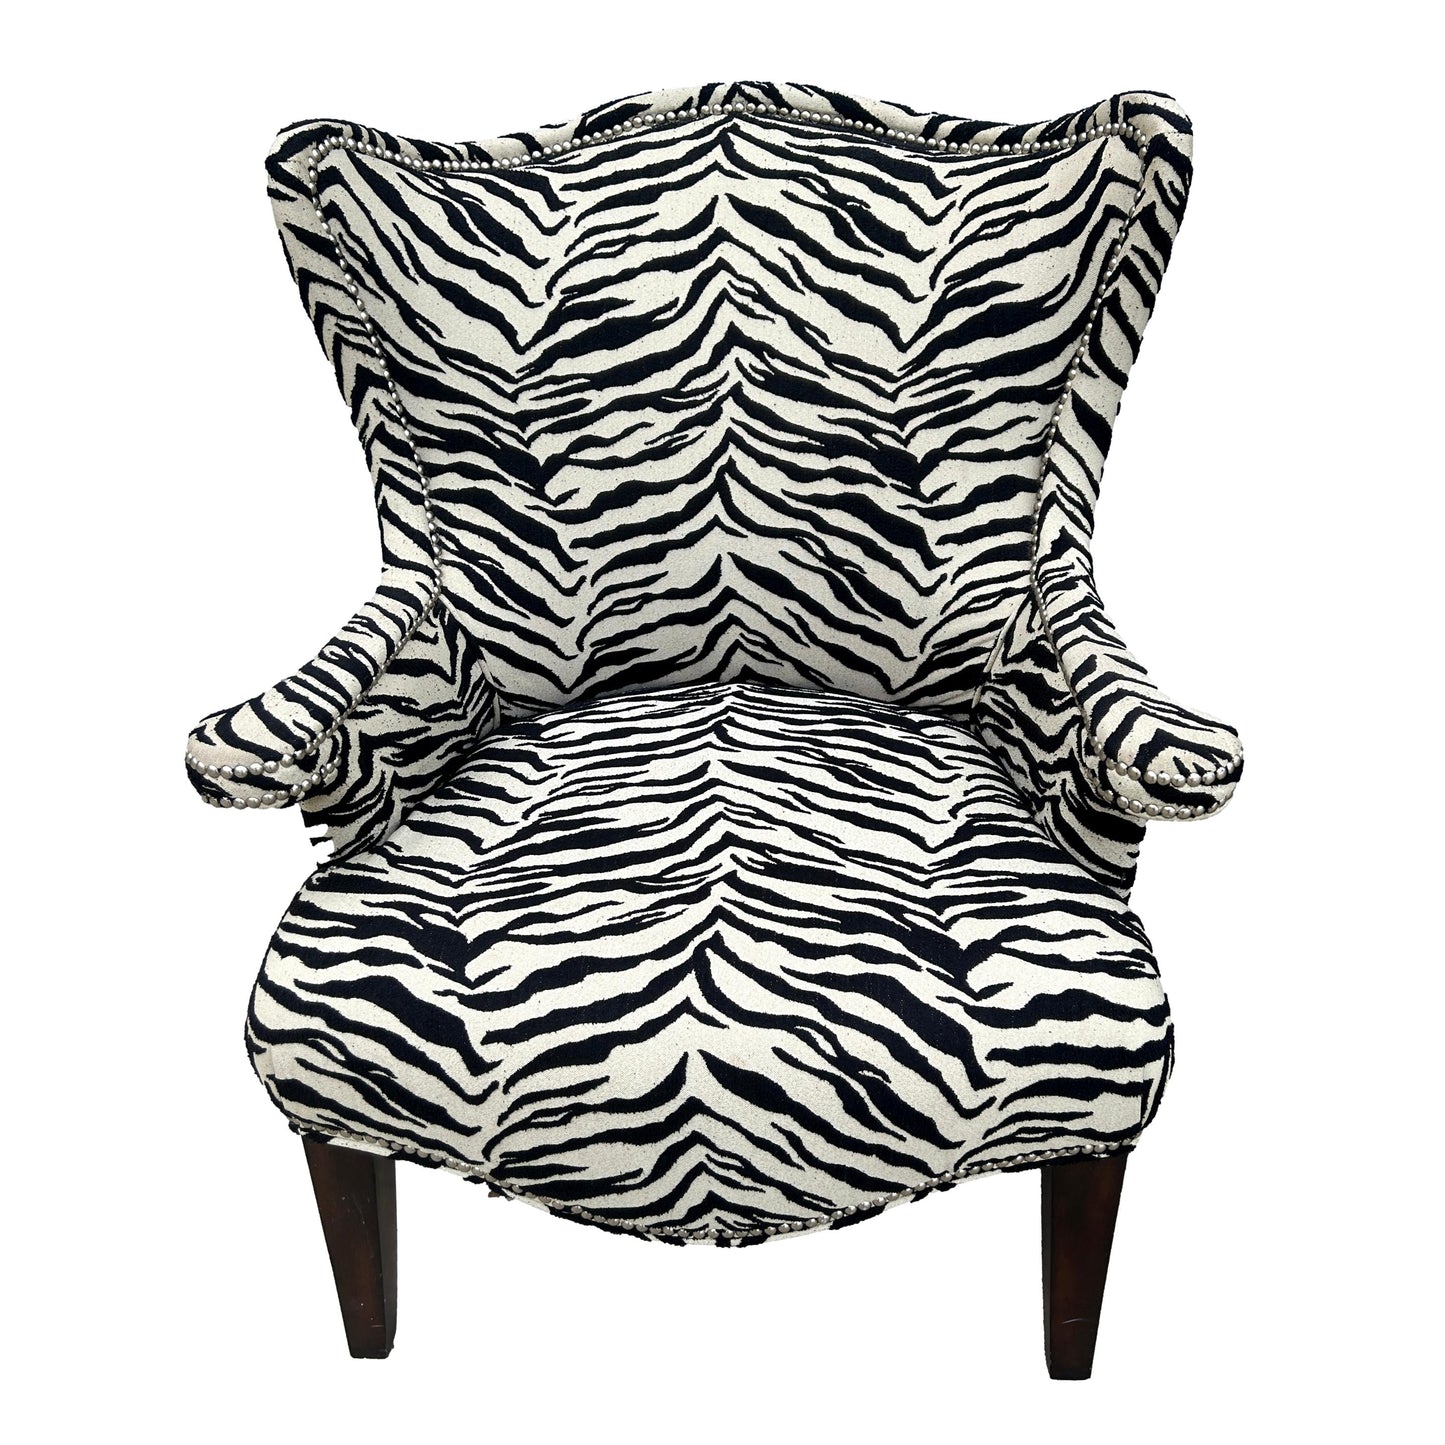 Pair of Zebra Wingback Chairs w/ Nailhead Accents